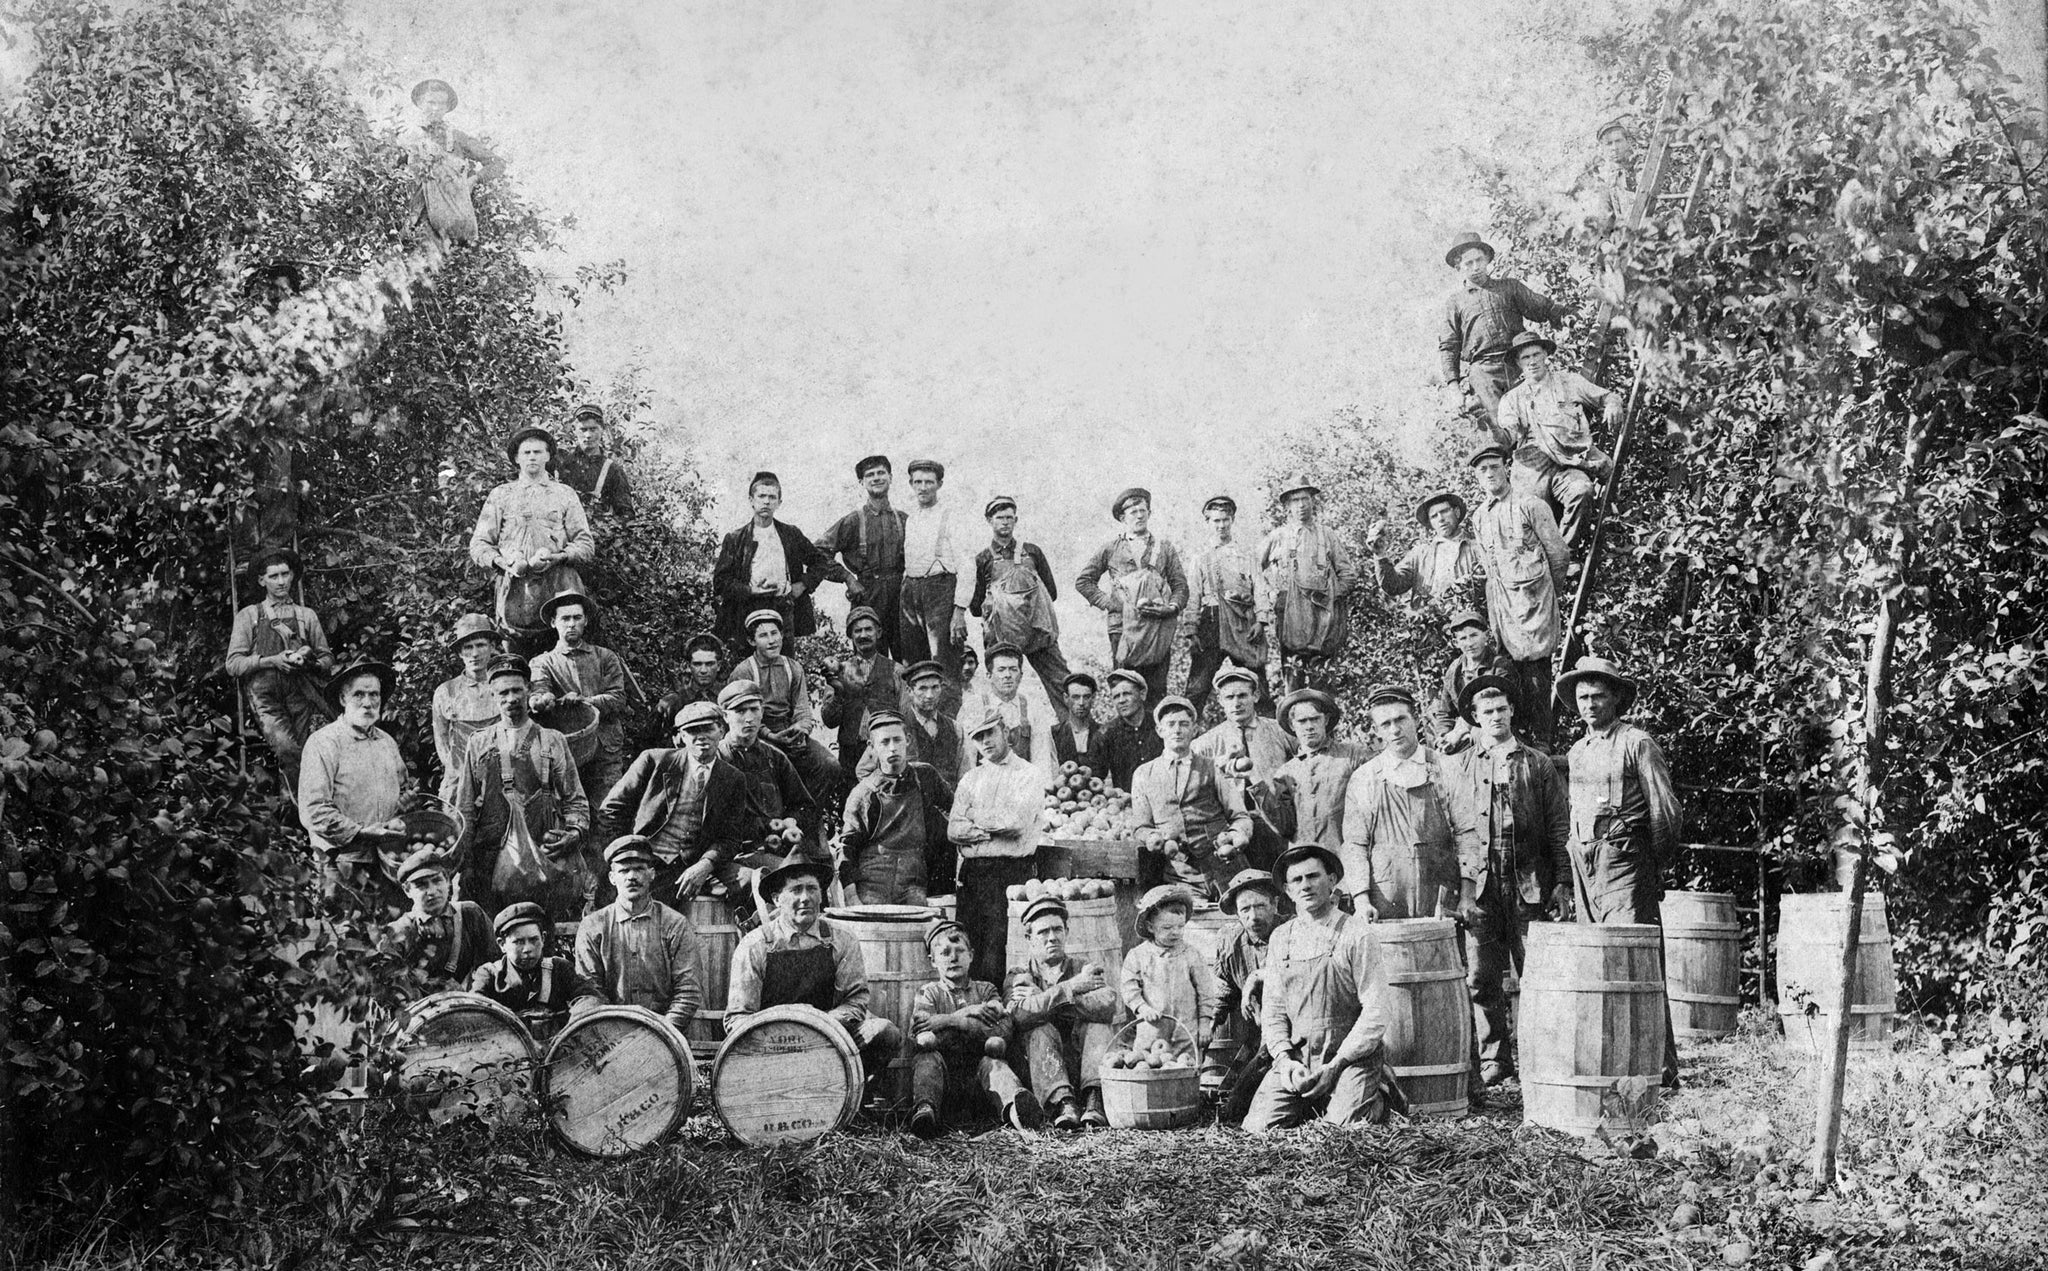 Orchard workers on the J.N. Thatcher Farm and Orchard, 1912. -- Courtesy Karen Thatcher